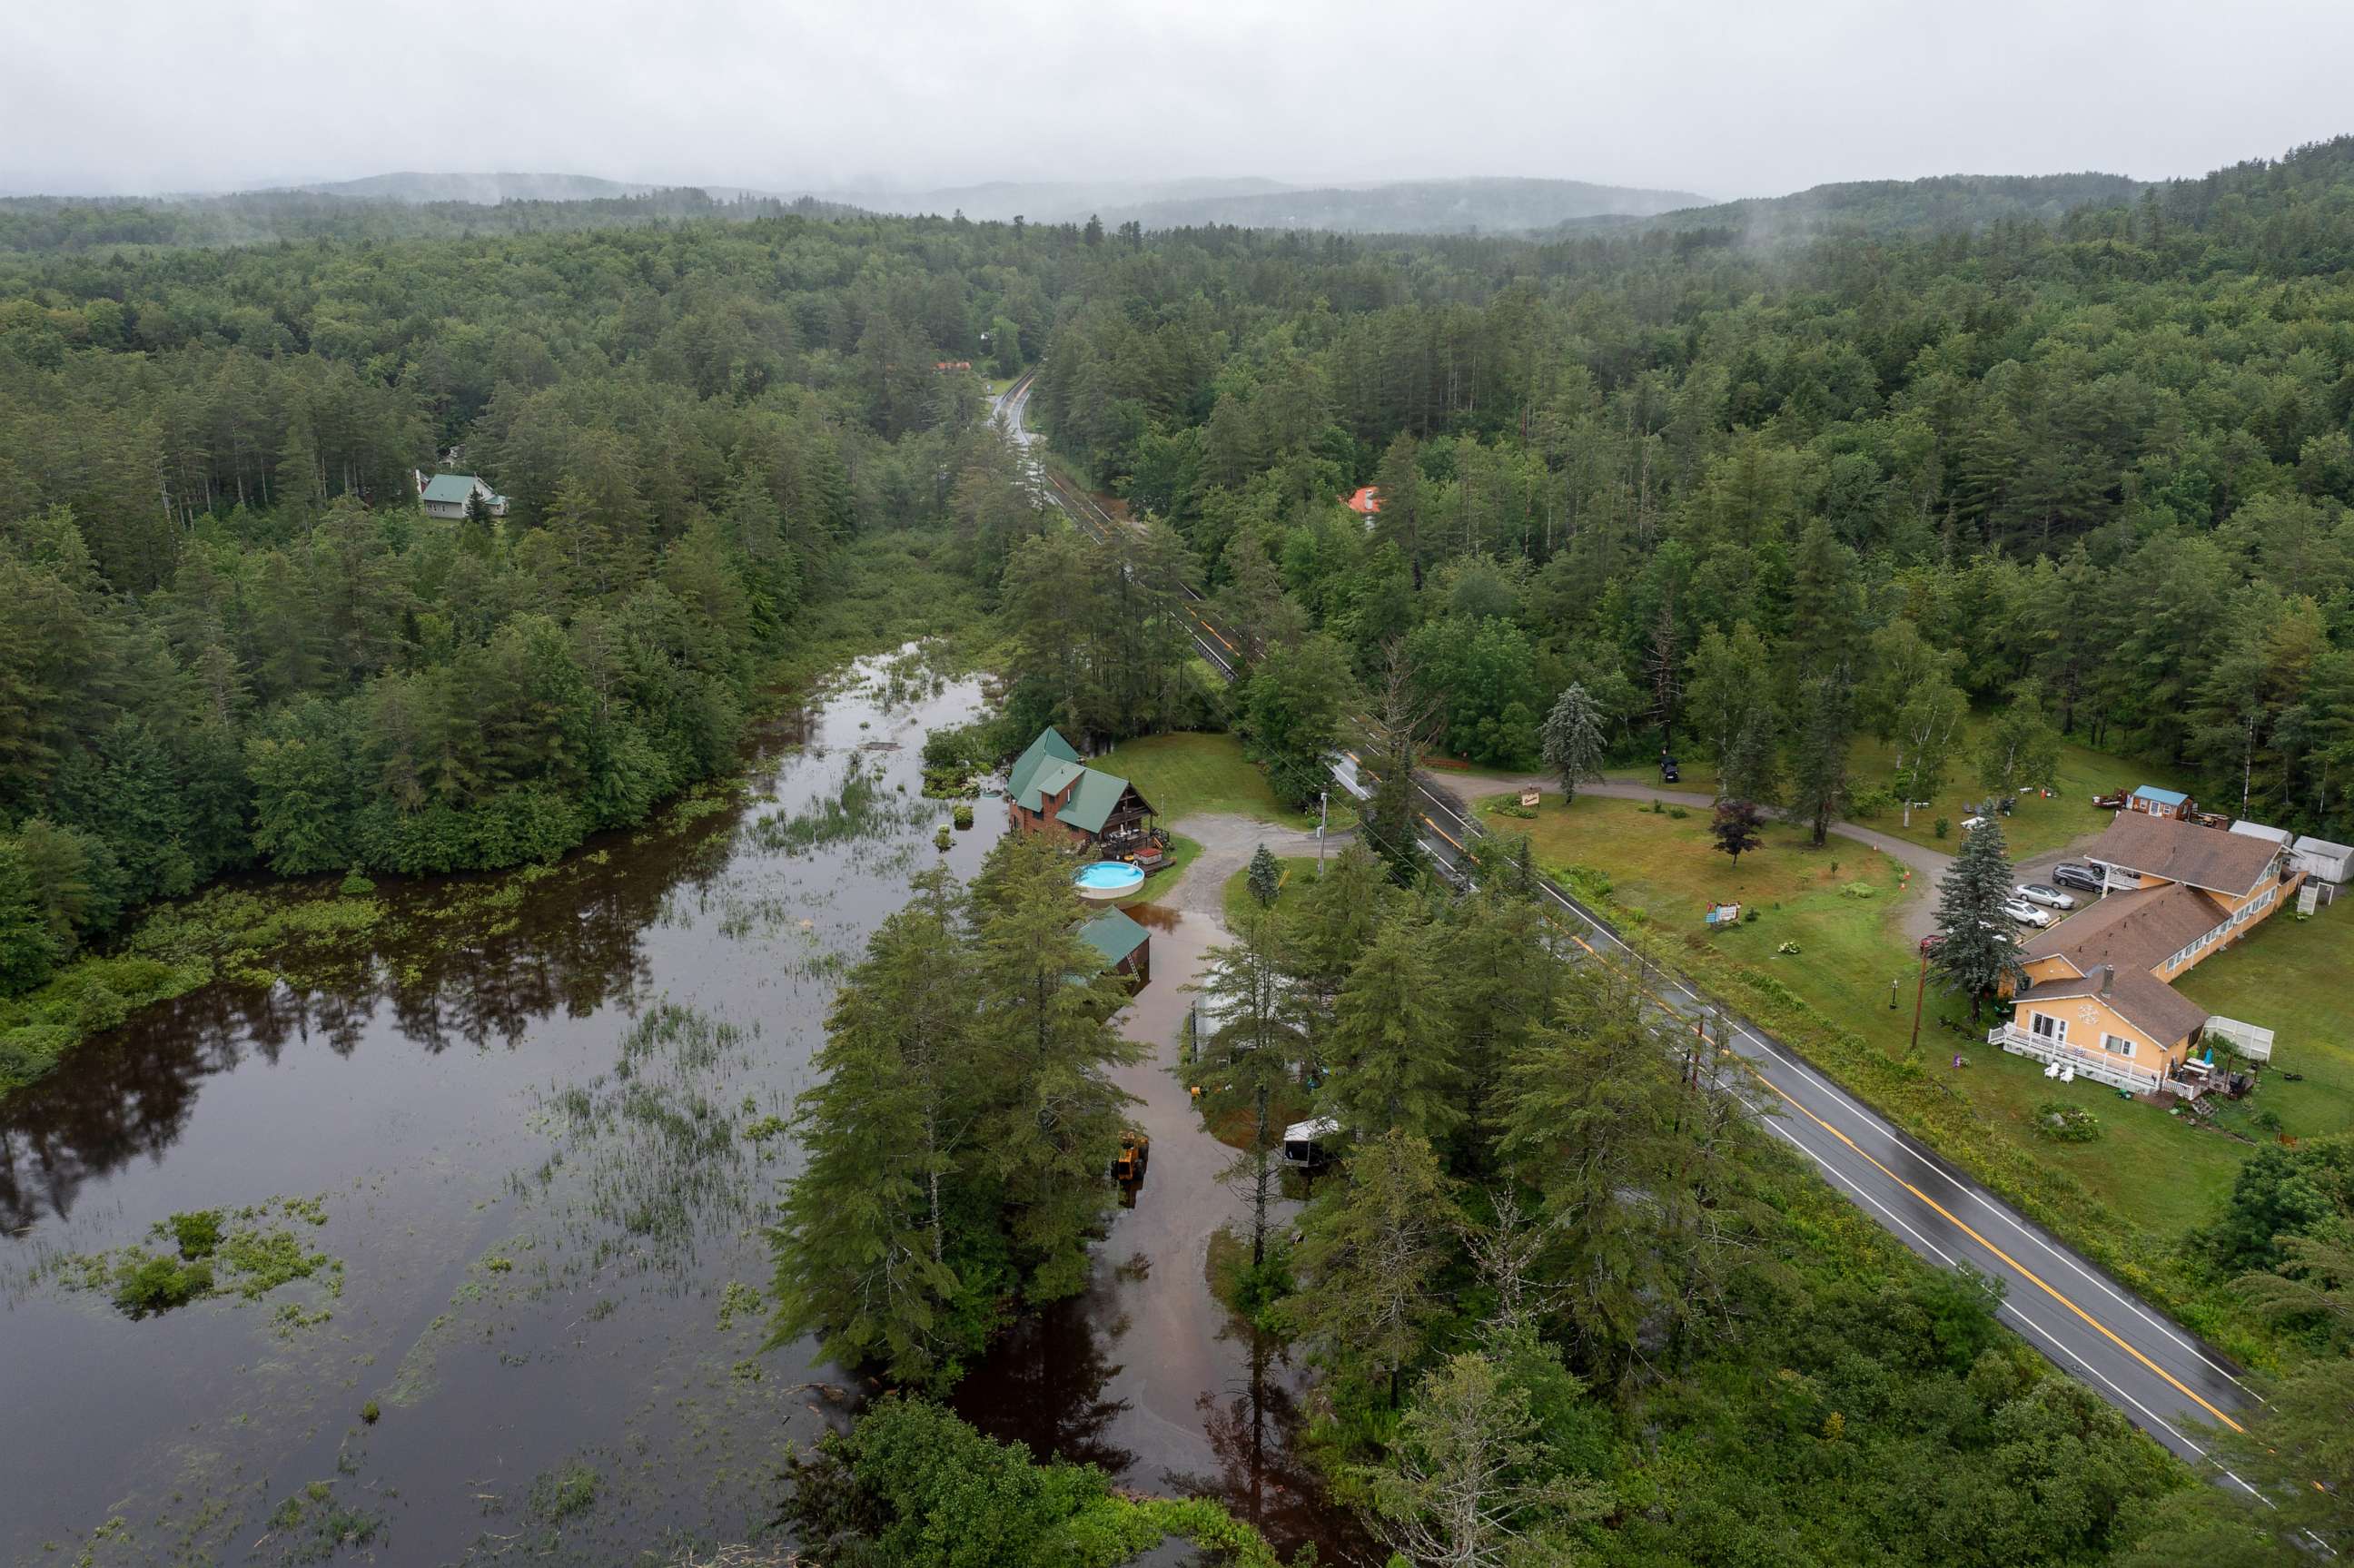 PHOTO: An aerial view shows floodwater covering residential property on Route 11 after heavy rainfall in Londonderry, Vermont, on July 10, 2023.